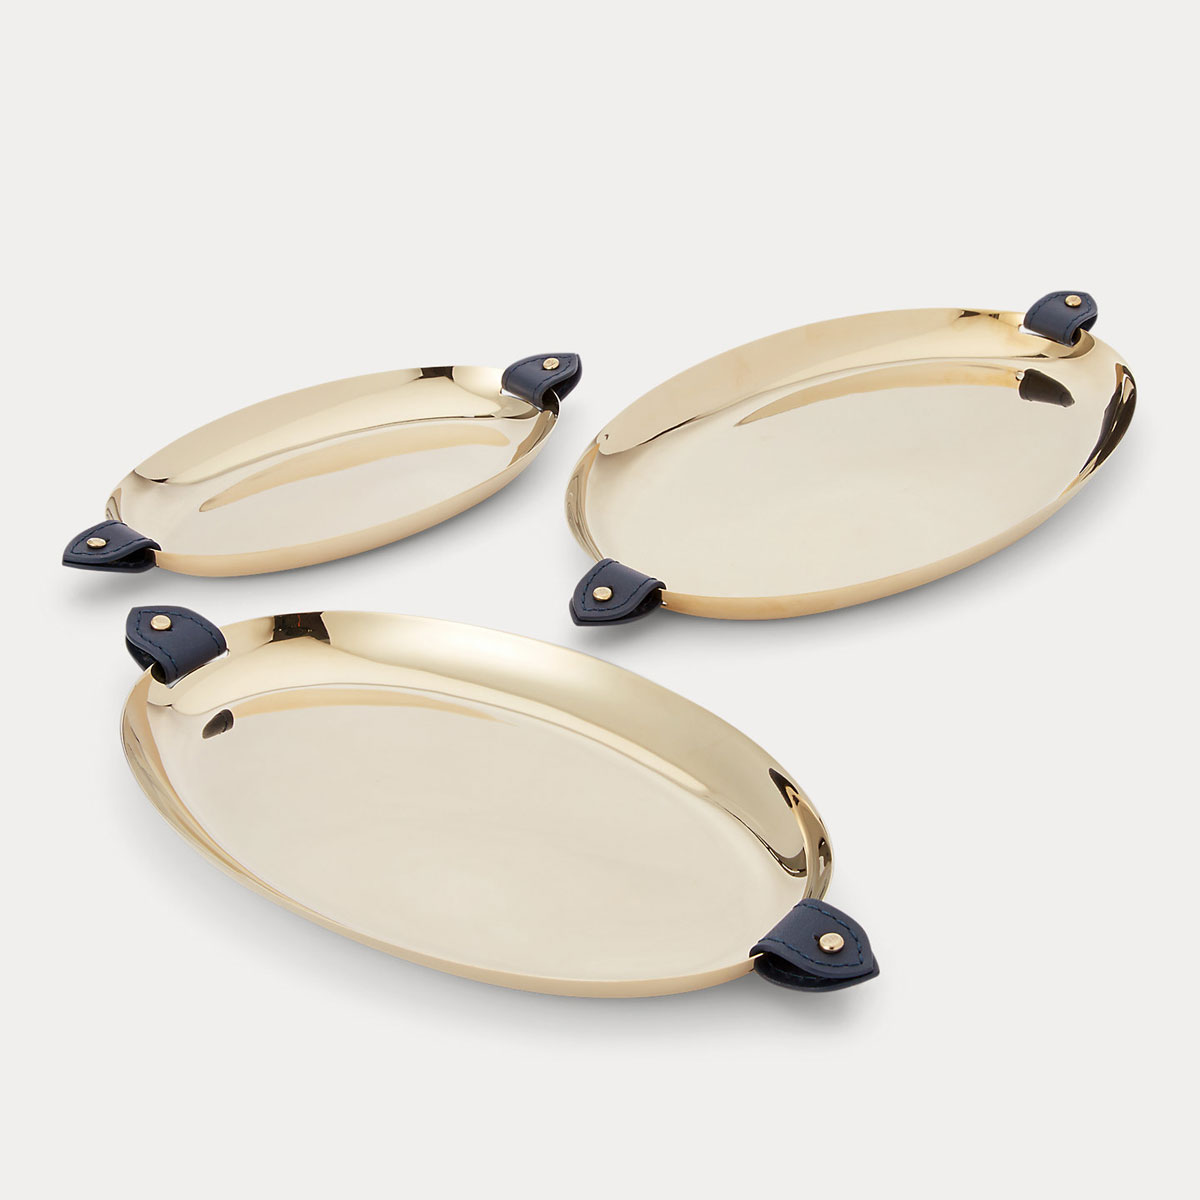 Ralph Lauren Wyatt S and 3 Nested Trays, Navy and Gold